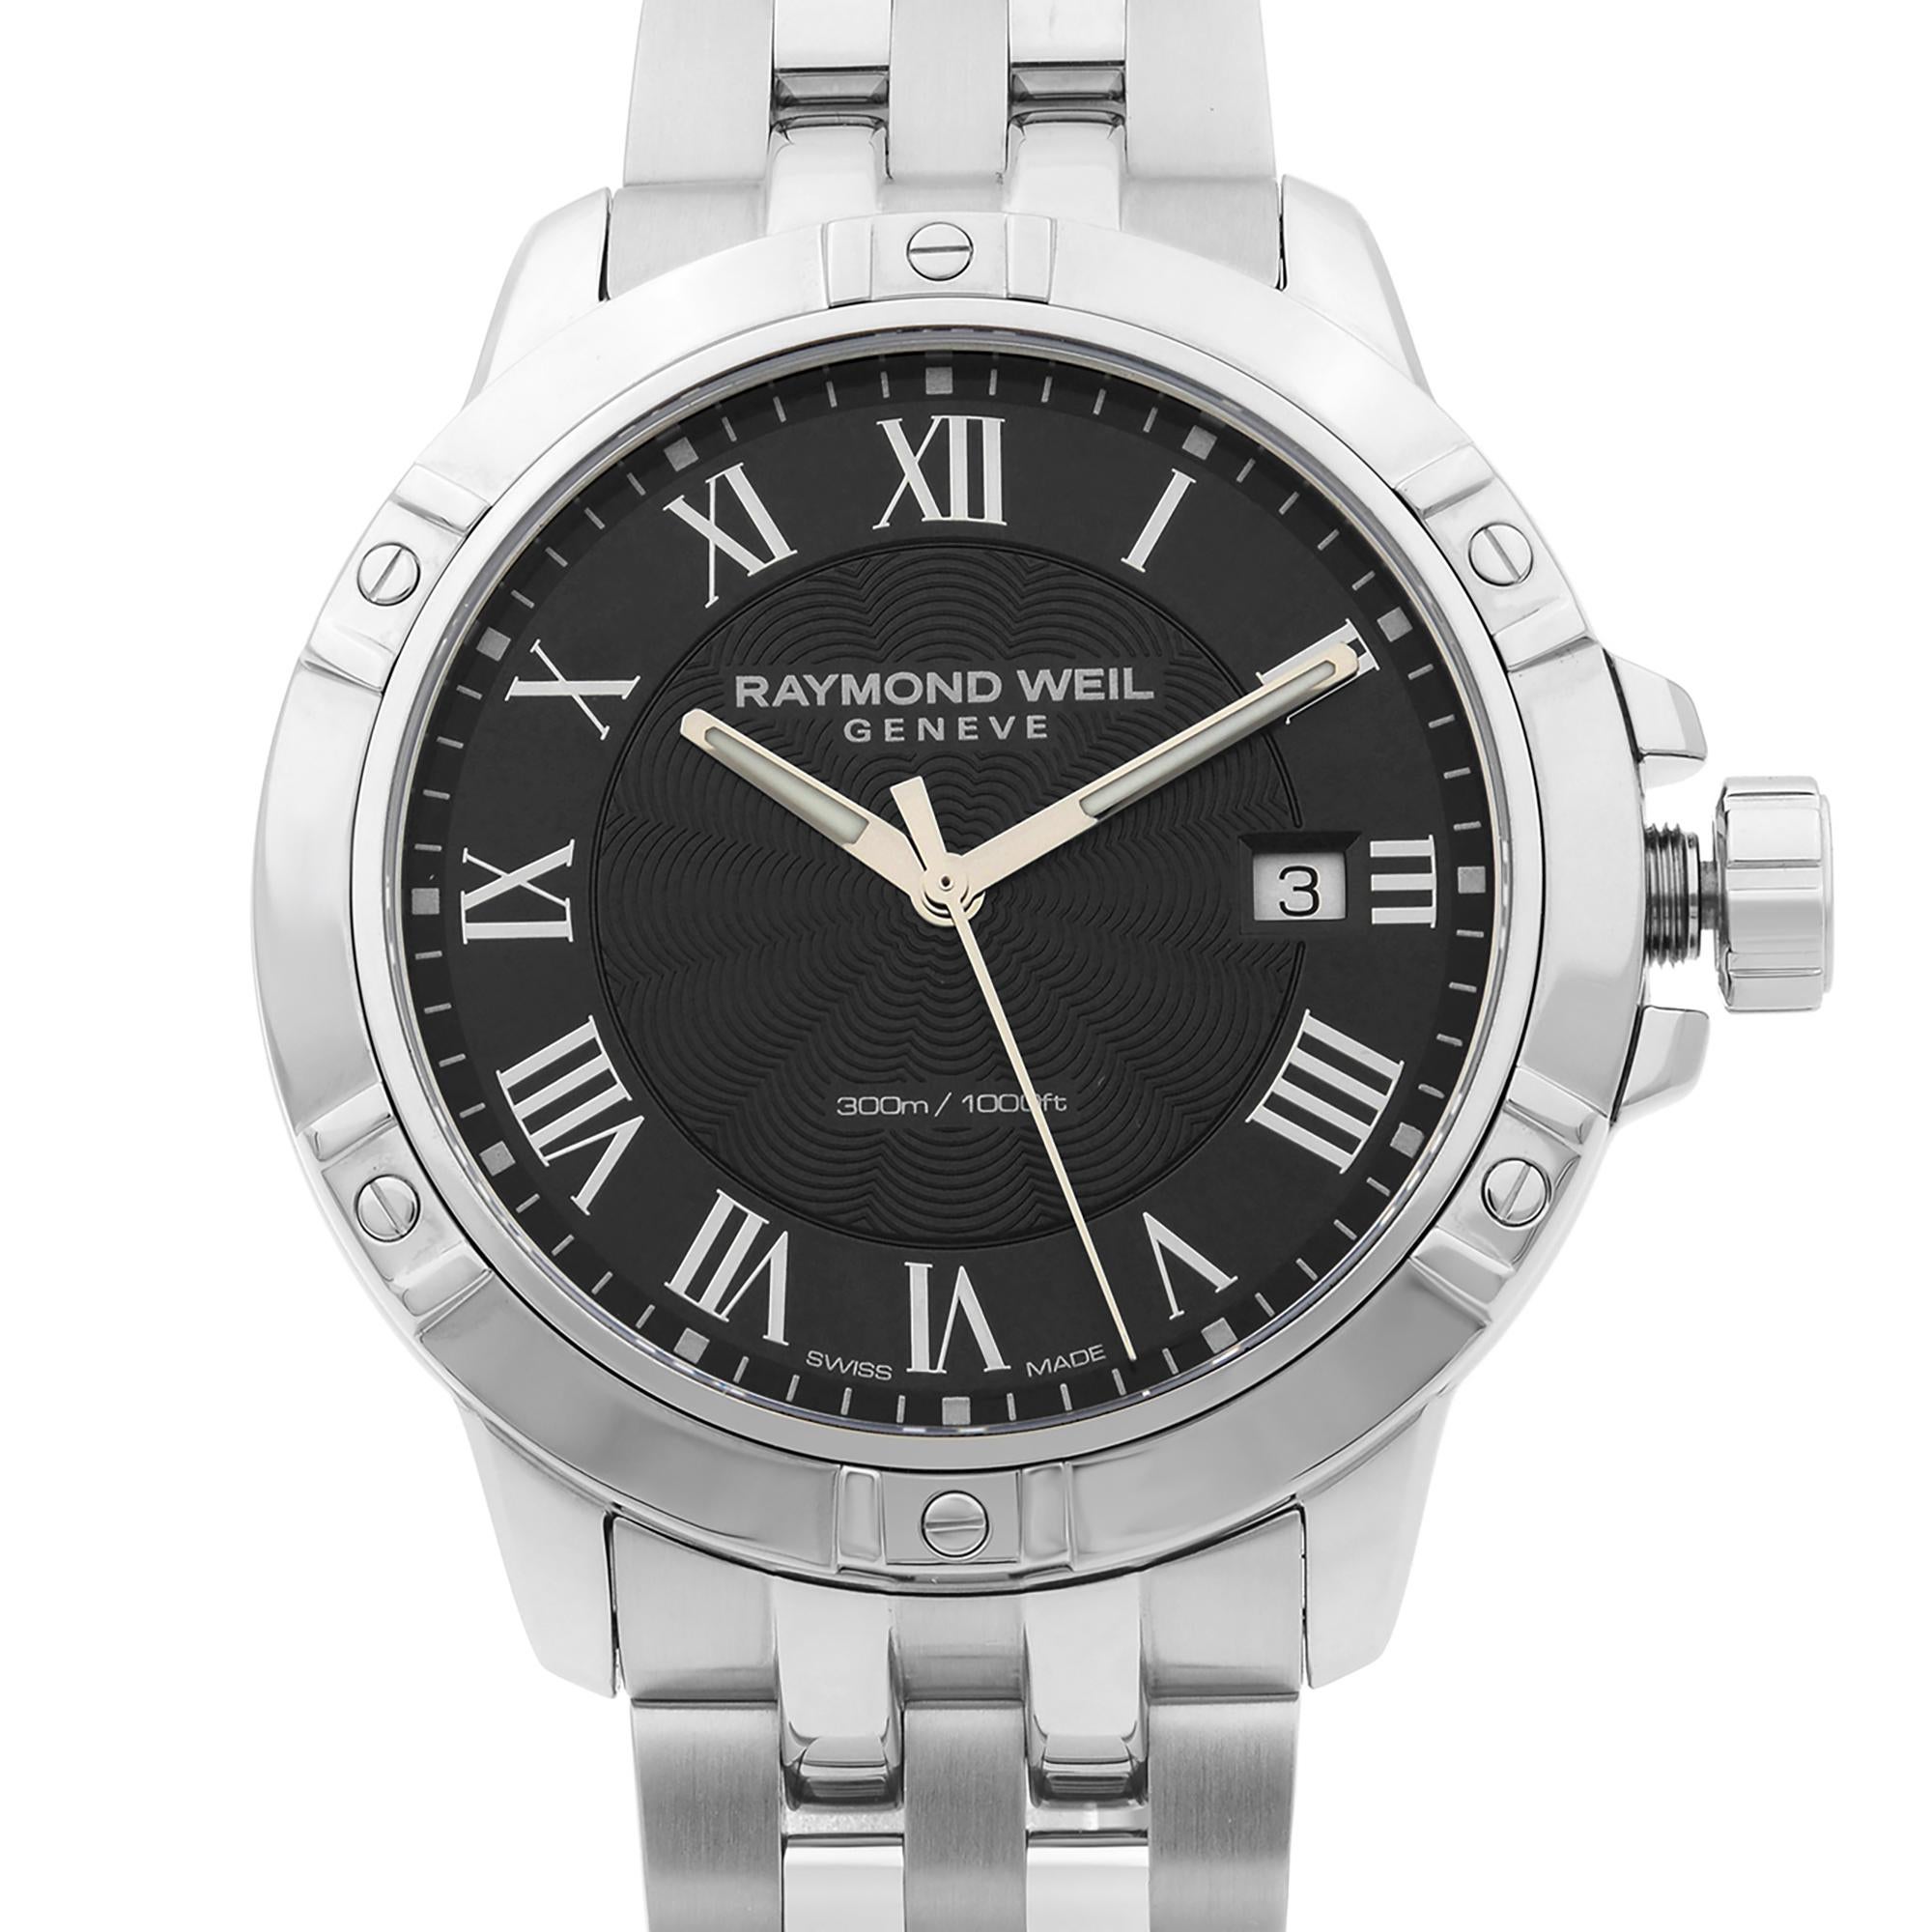 New Raymond Weil Tango 41mm Steel Black Date Dial Quartz Classic Watch. Manufacturers box and papers are included. 3 year warranty provided by Chronostore is included.
Brand RAYMOND WEIL
Department Men
Model Number 8160-ST-00208
Country/Region of